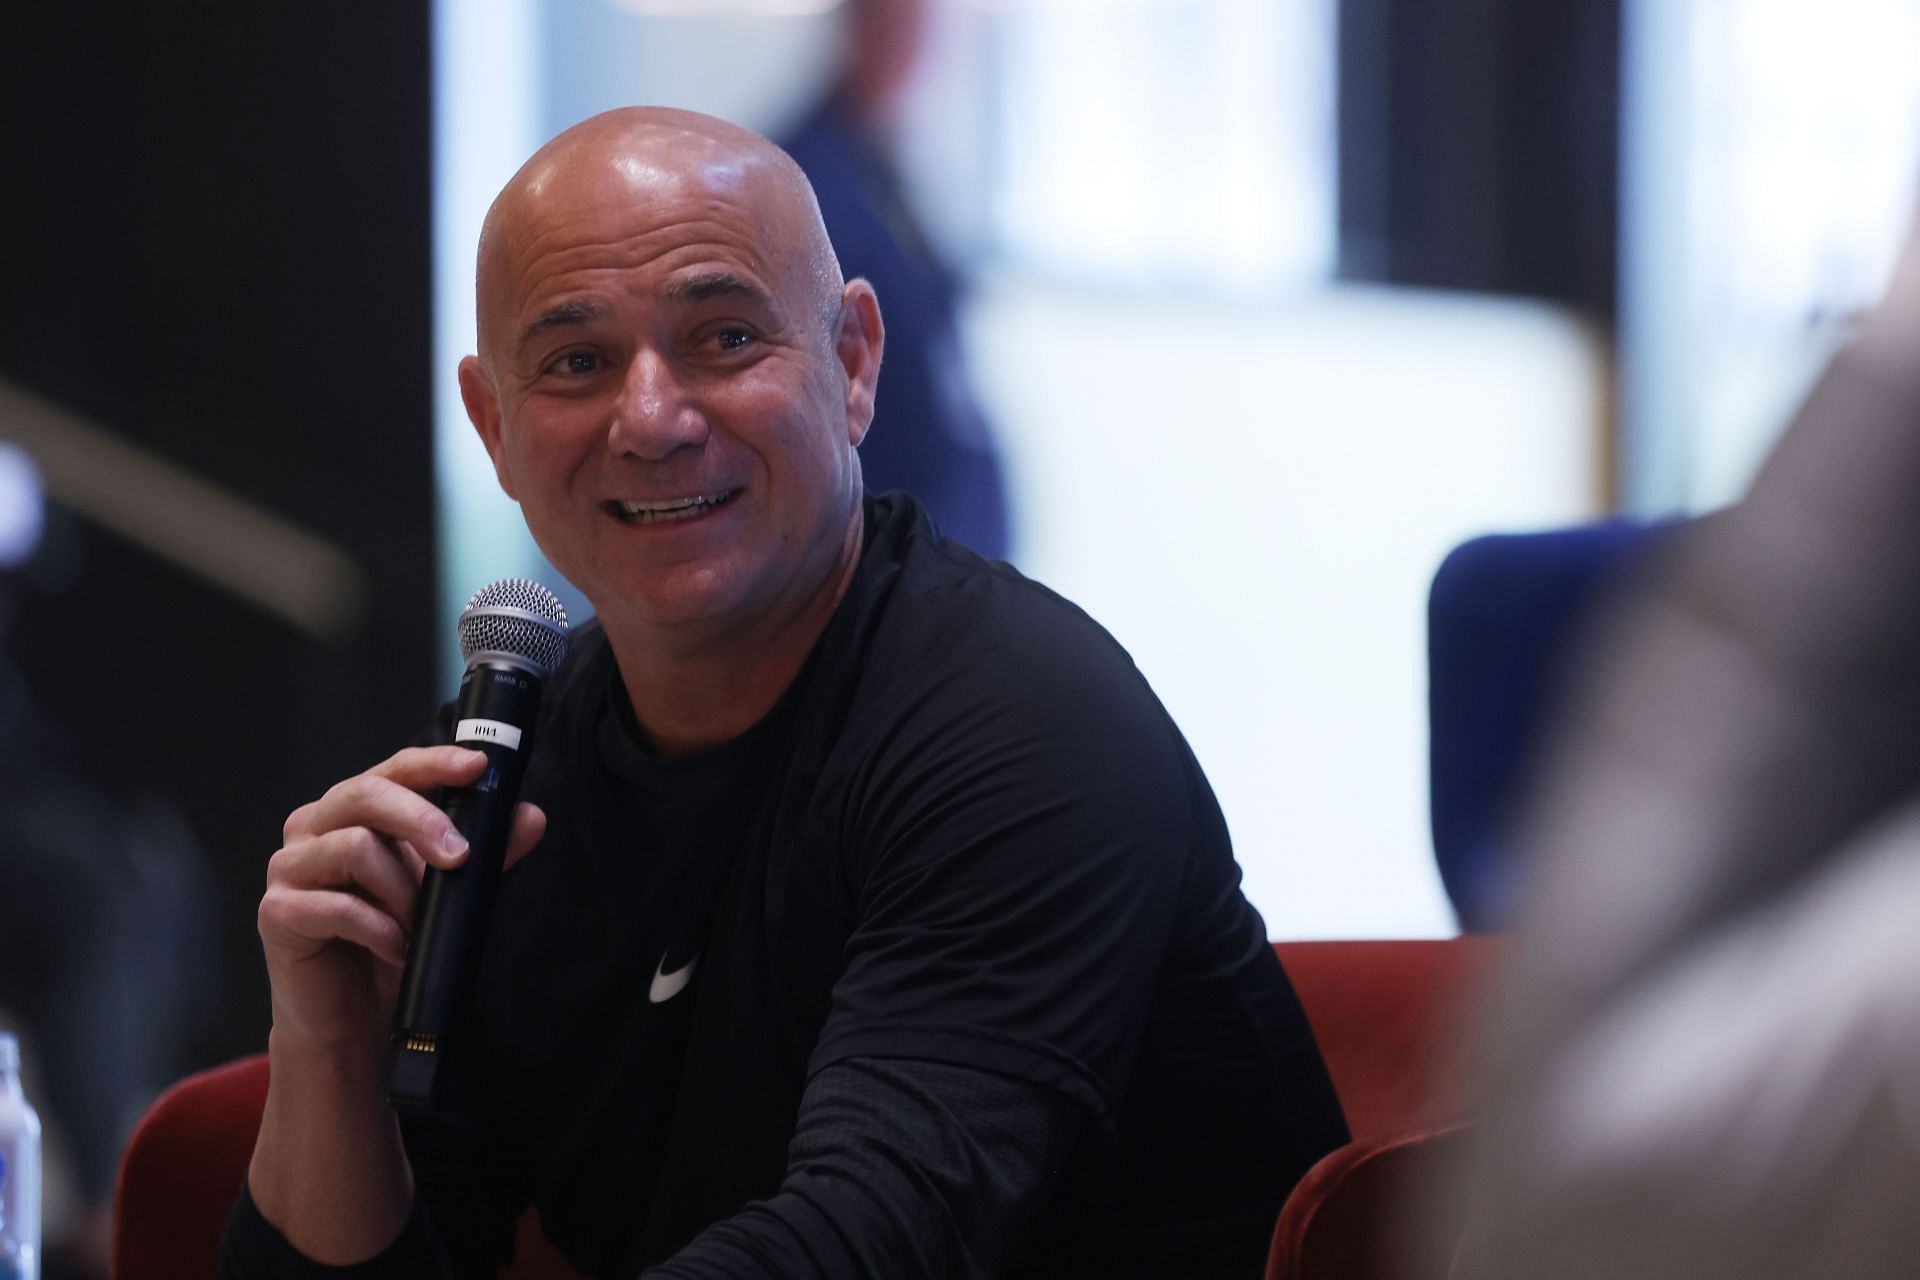 Andre Agassi during an interview